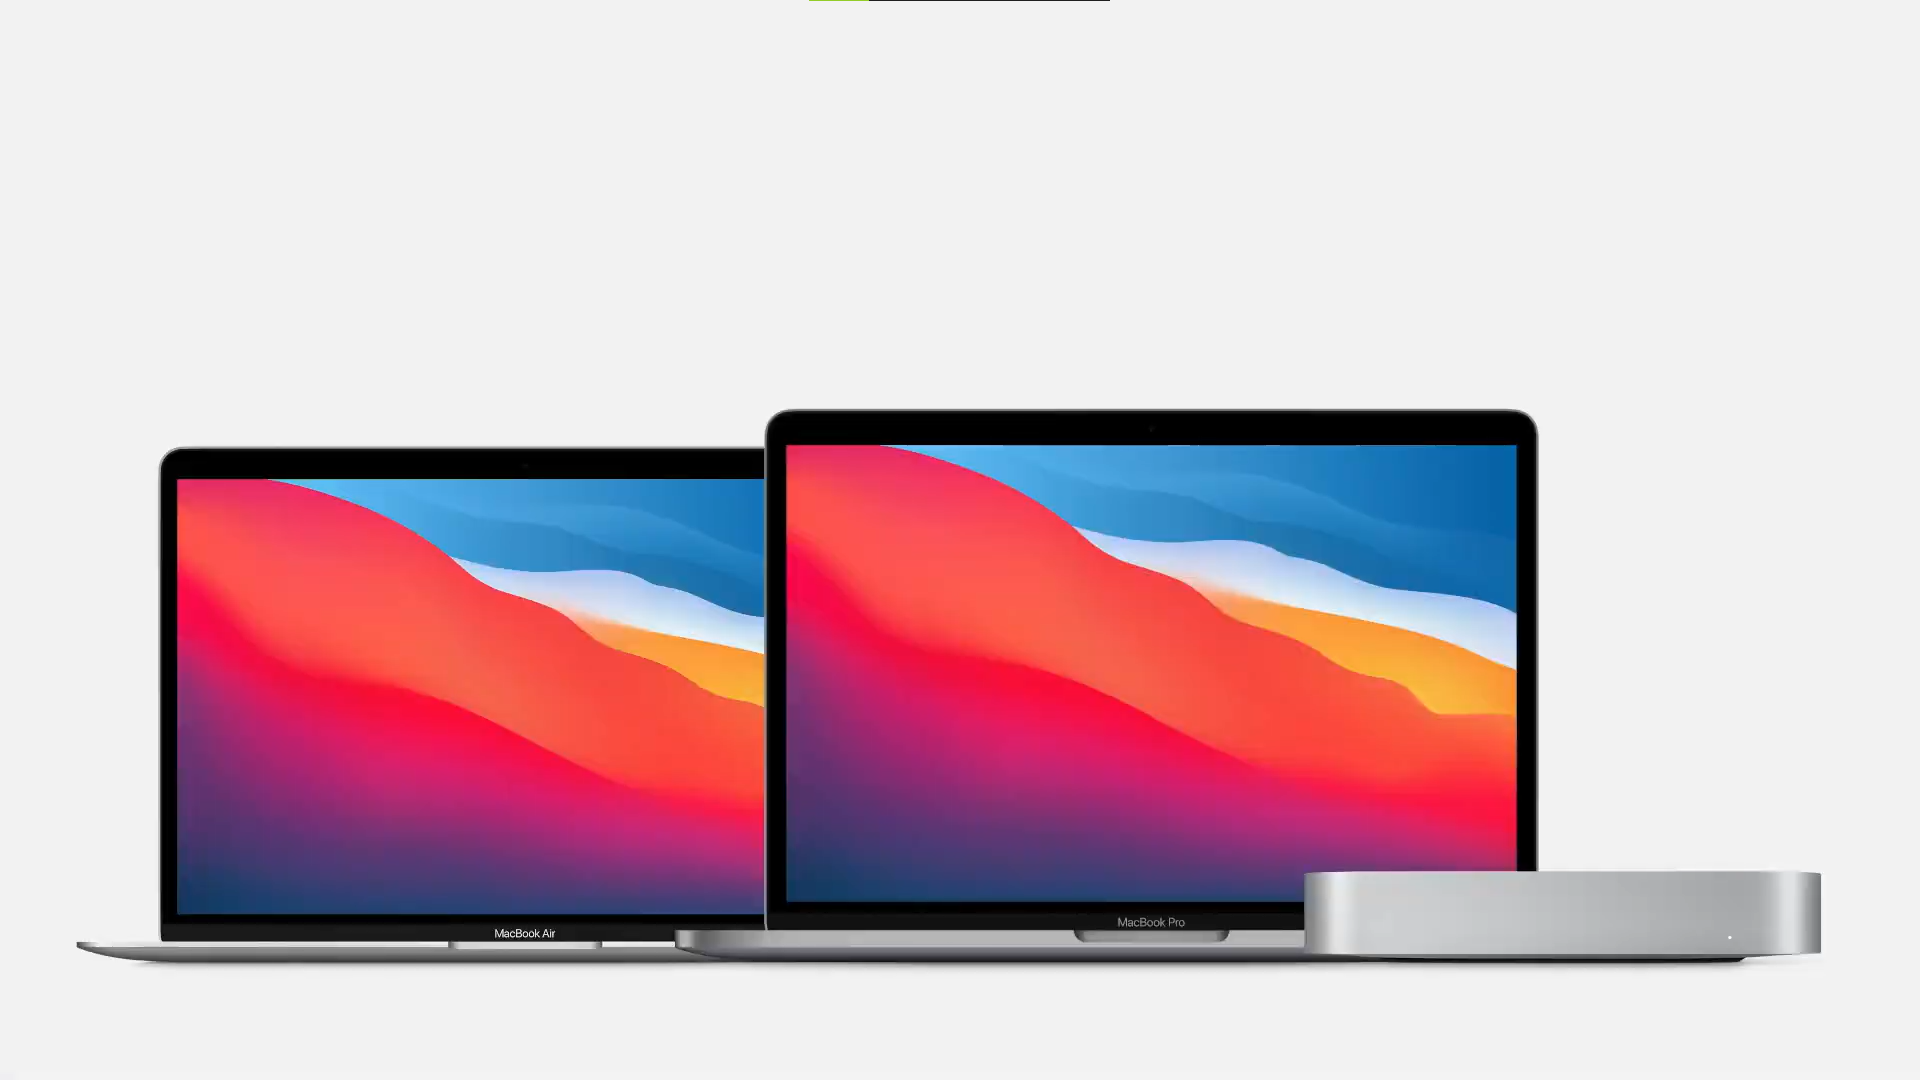 Apple MacBook Pro, MacBook Air, and Mac Mini based on Apple M1 chip launched